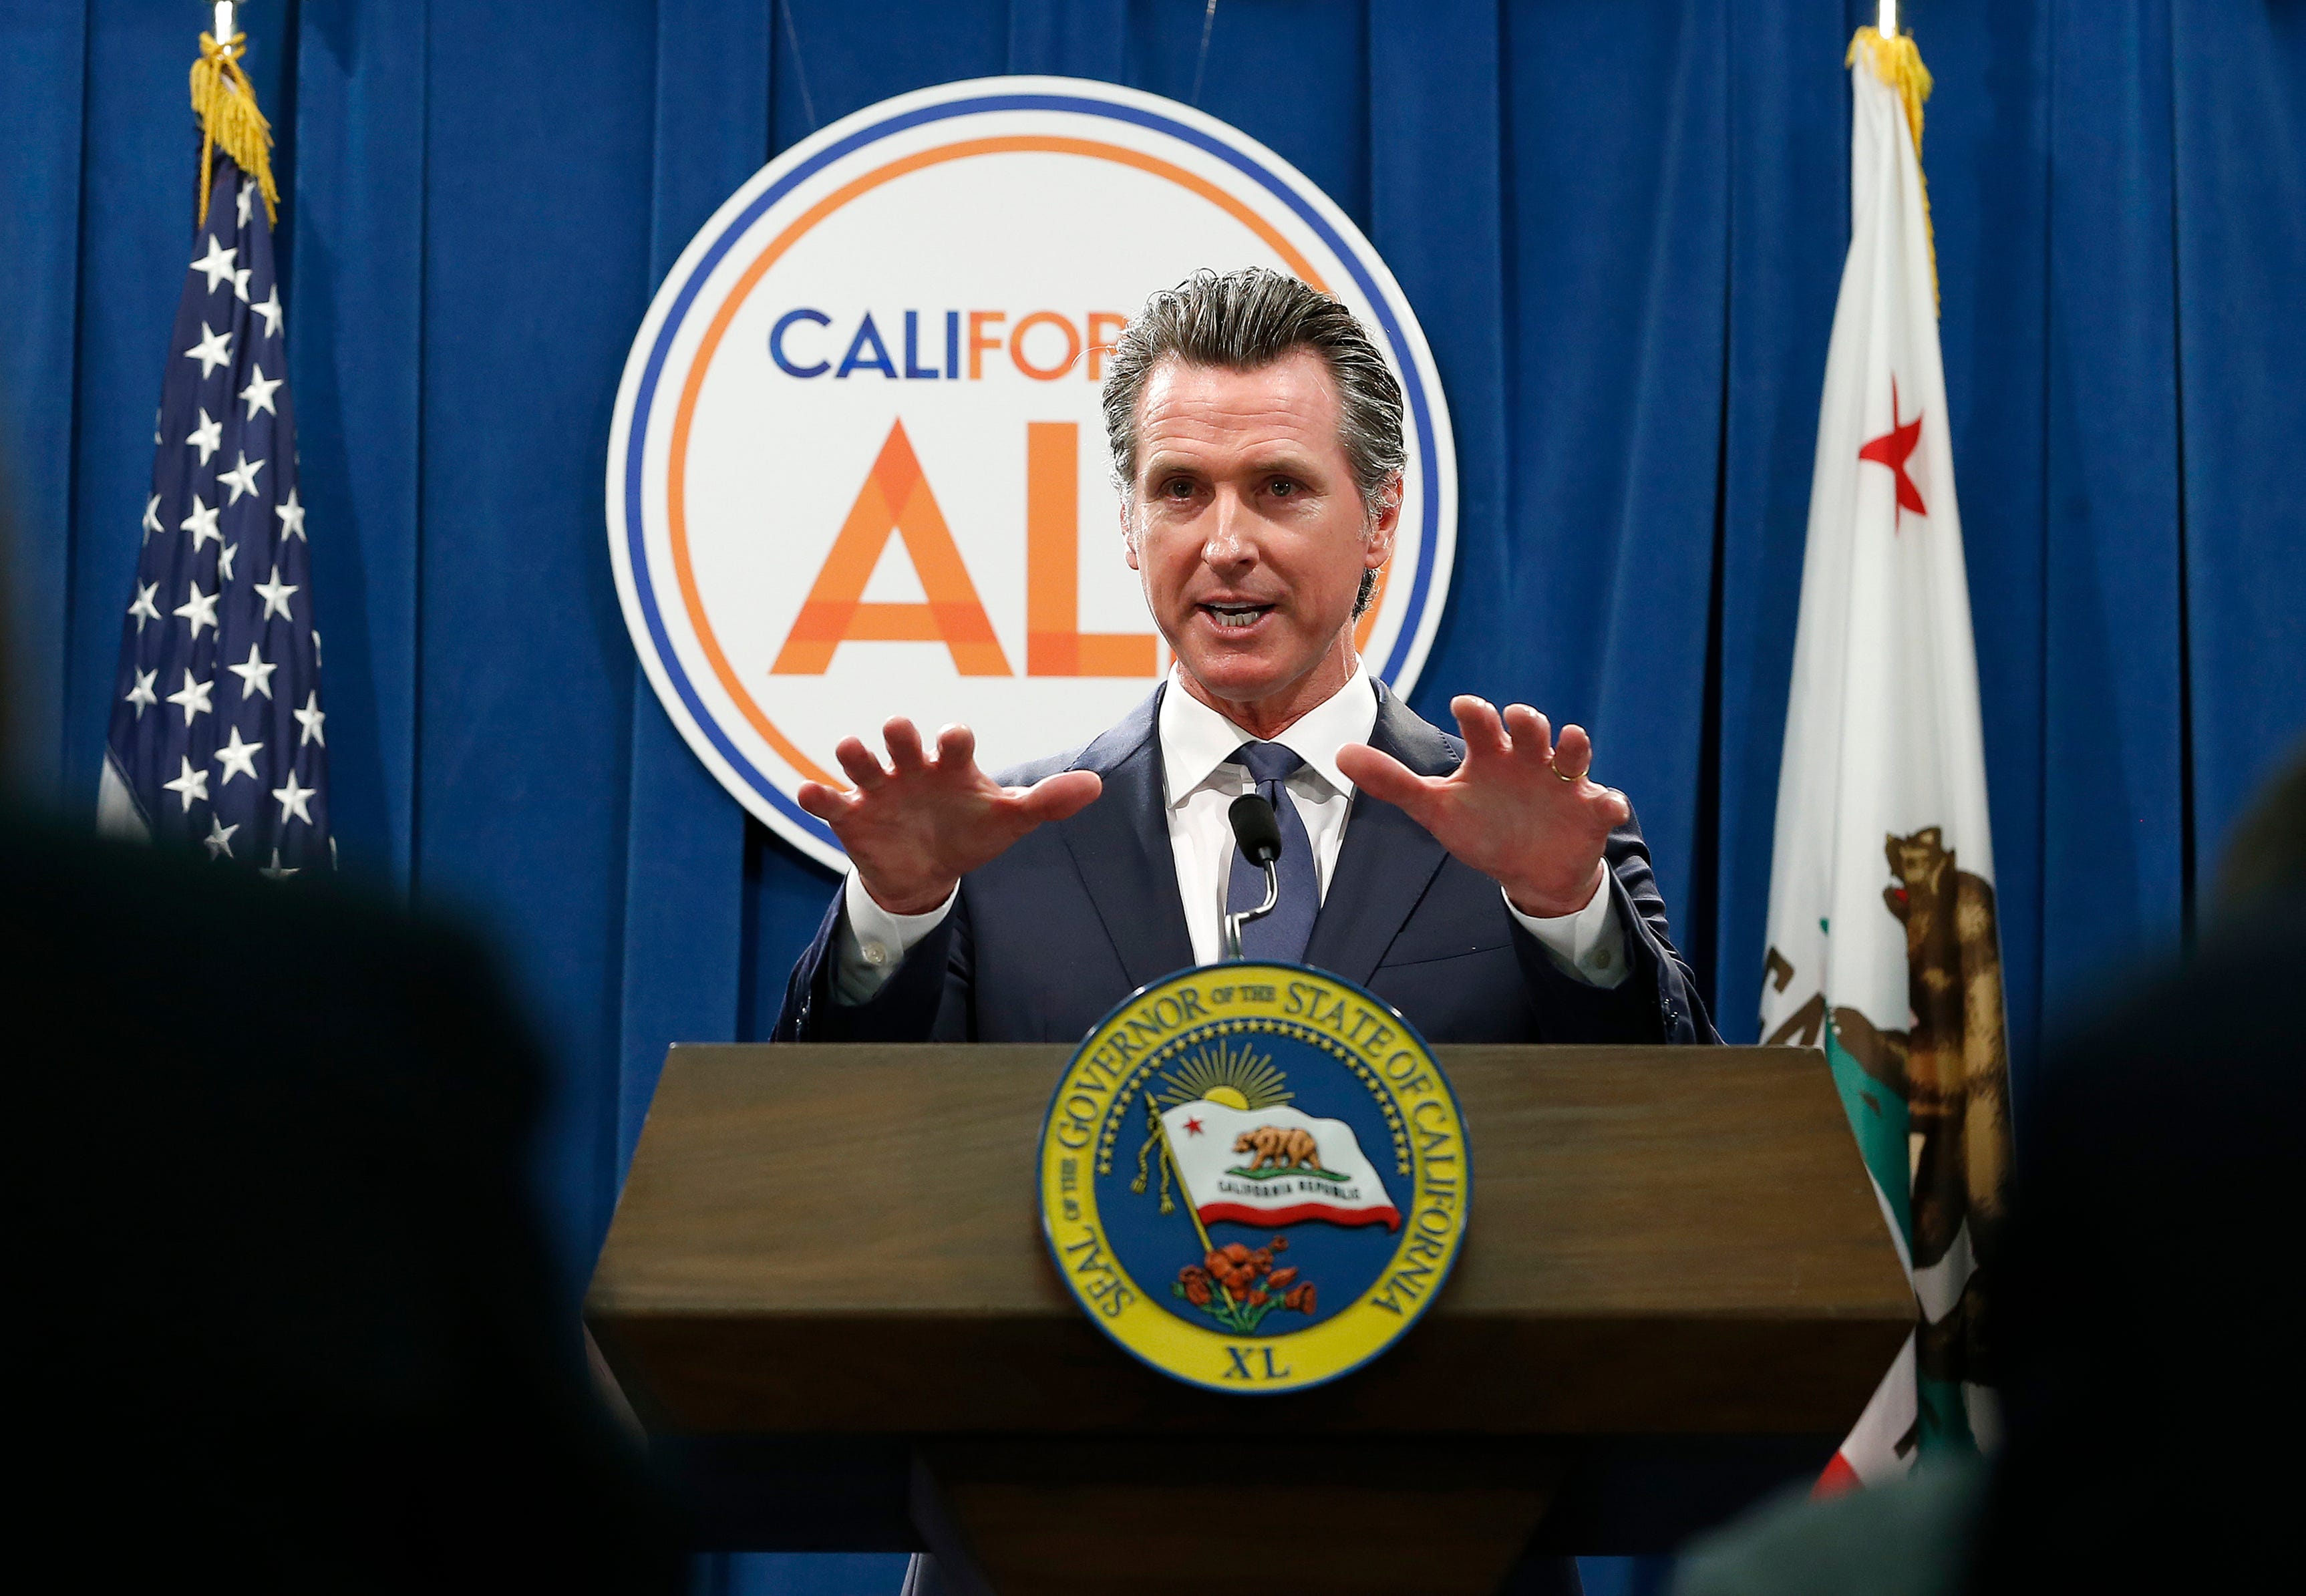 California Gov. Gavin Newsom told the California Commission on Peace Officer Standards and Training to suspend training on the carotid restraint technique, a method used by law enforcement to cut the flow of blood and oxygen to the brain.